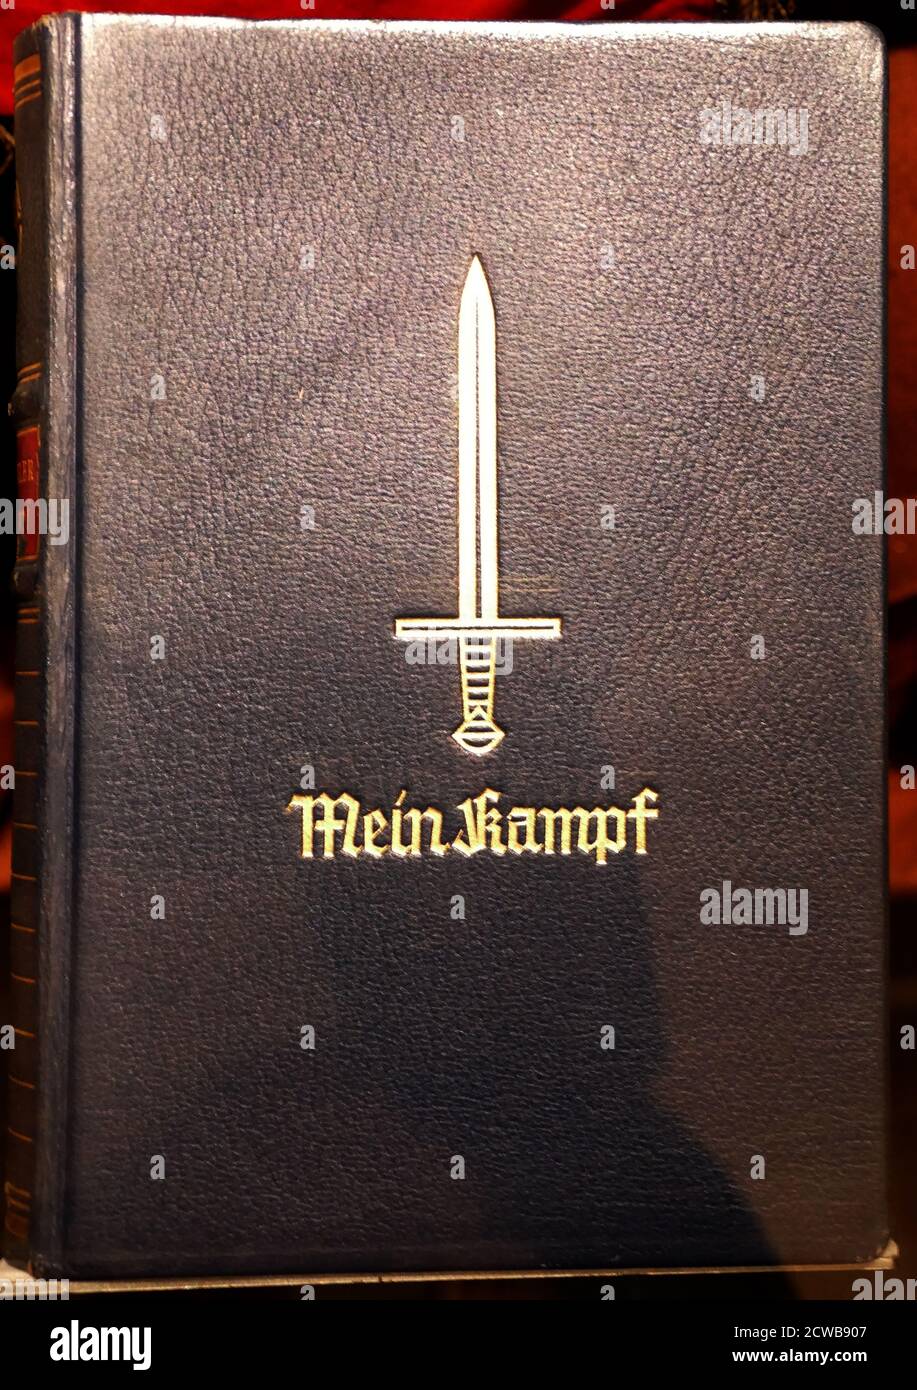 German edition of Mein Kampf (My Struggle or My Fight), autobiographical manifesto by Nazi Party leader Adolf Hitler. The work describes the process by which Hitler became anti-Semitic and outlines his political ideology and future plans for Germany. Volume 1 of Mein Kampf was published in 1925 and Volume 2 in 1926 Stock Photo